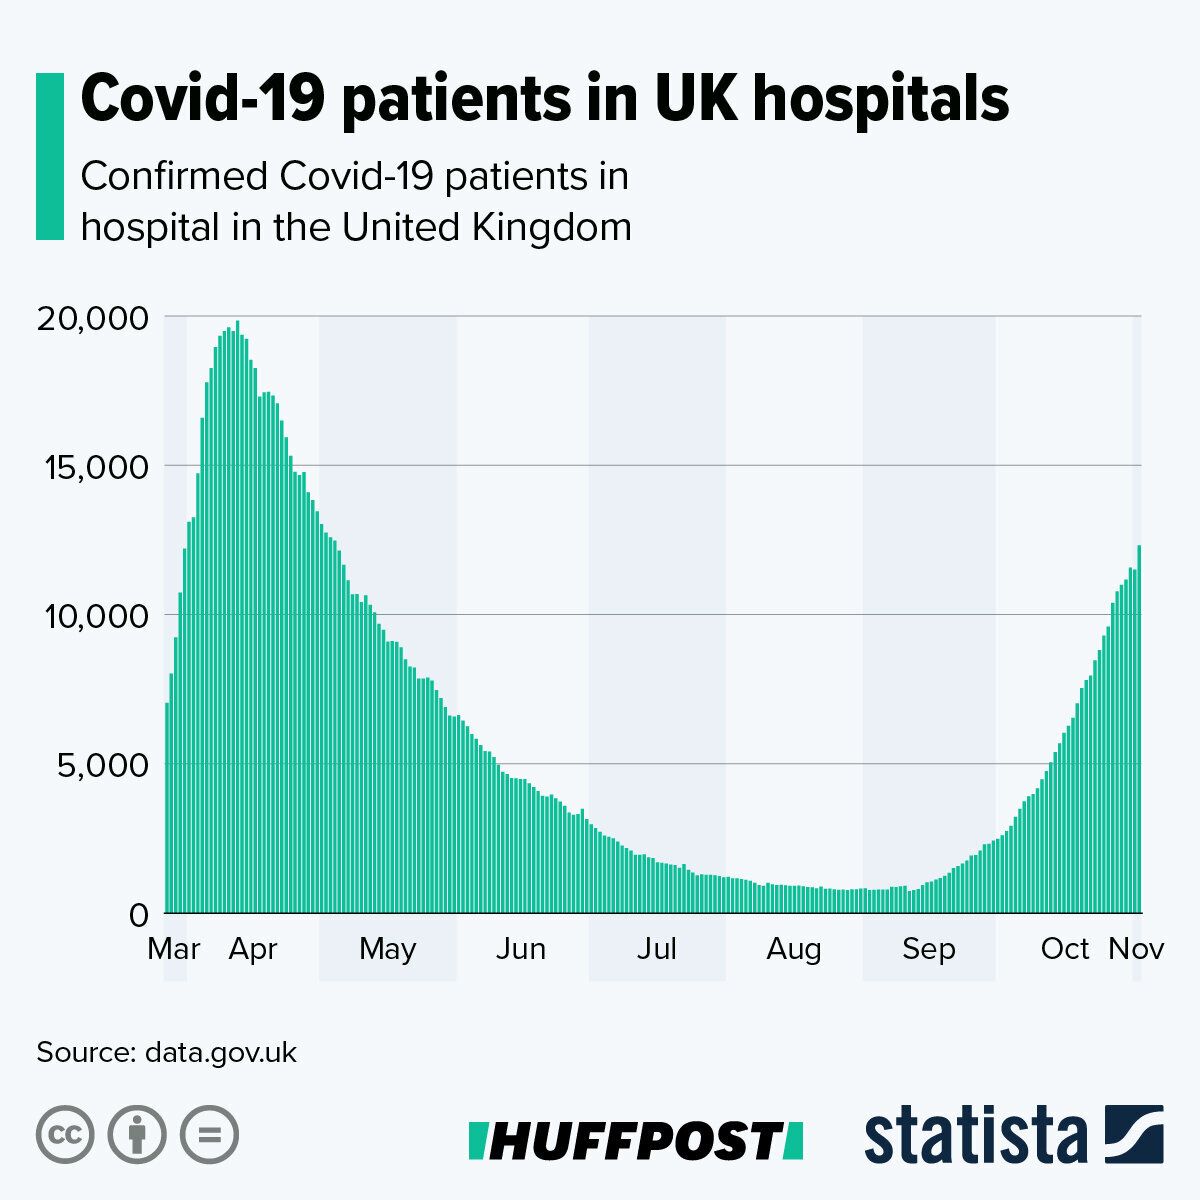 Covid-19 patients in hospital in the UK 